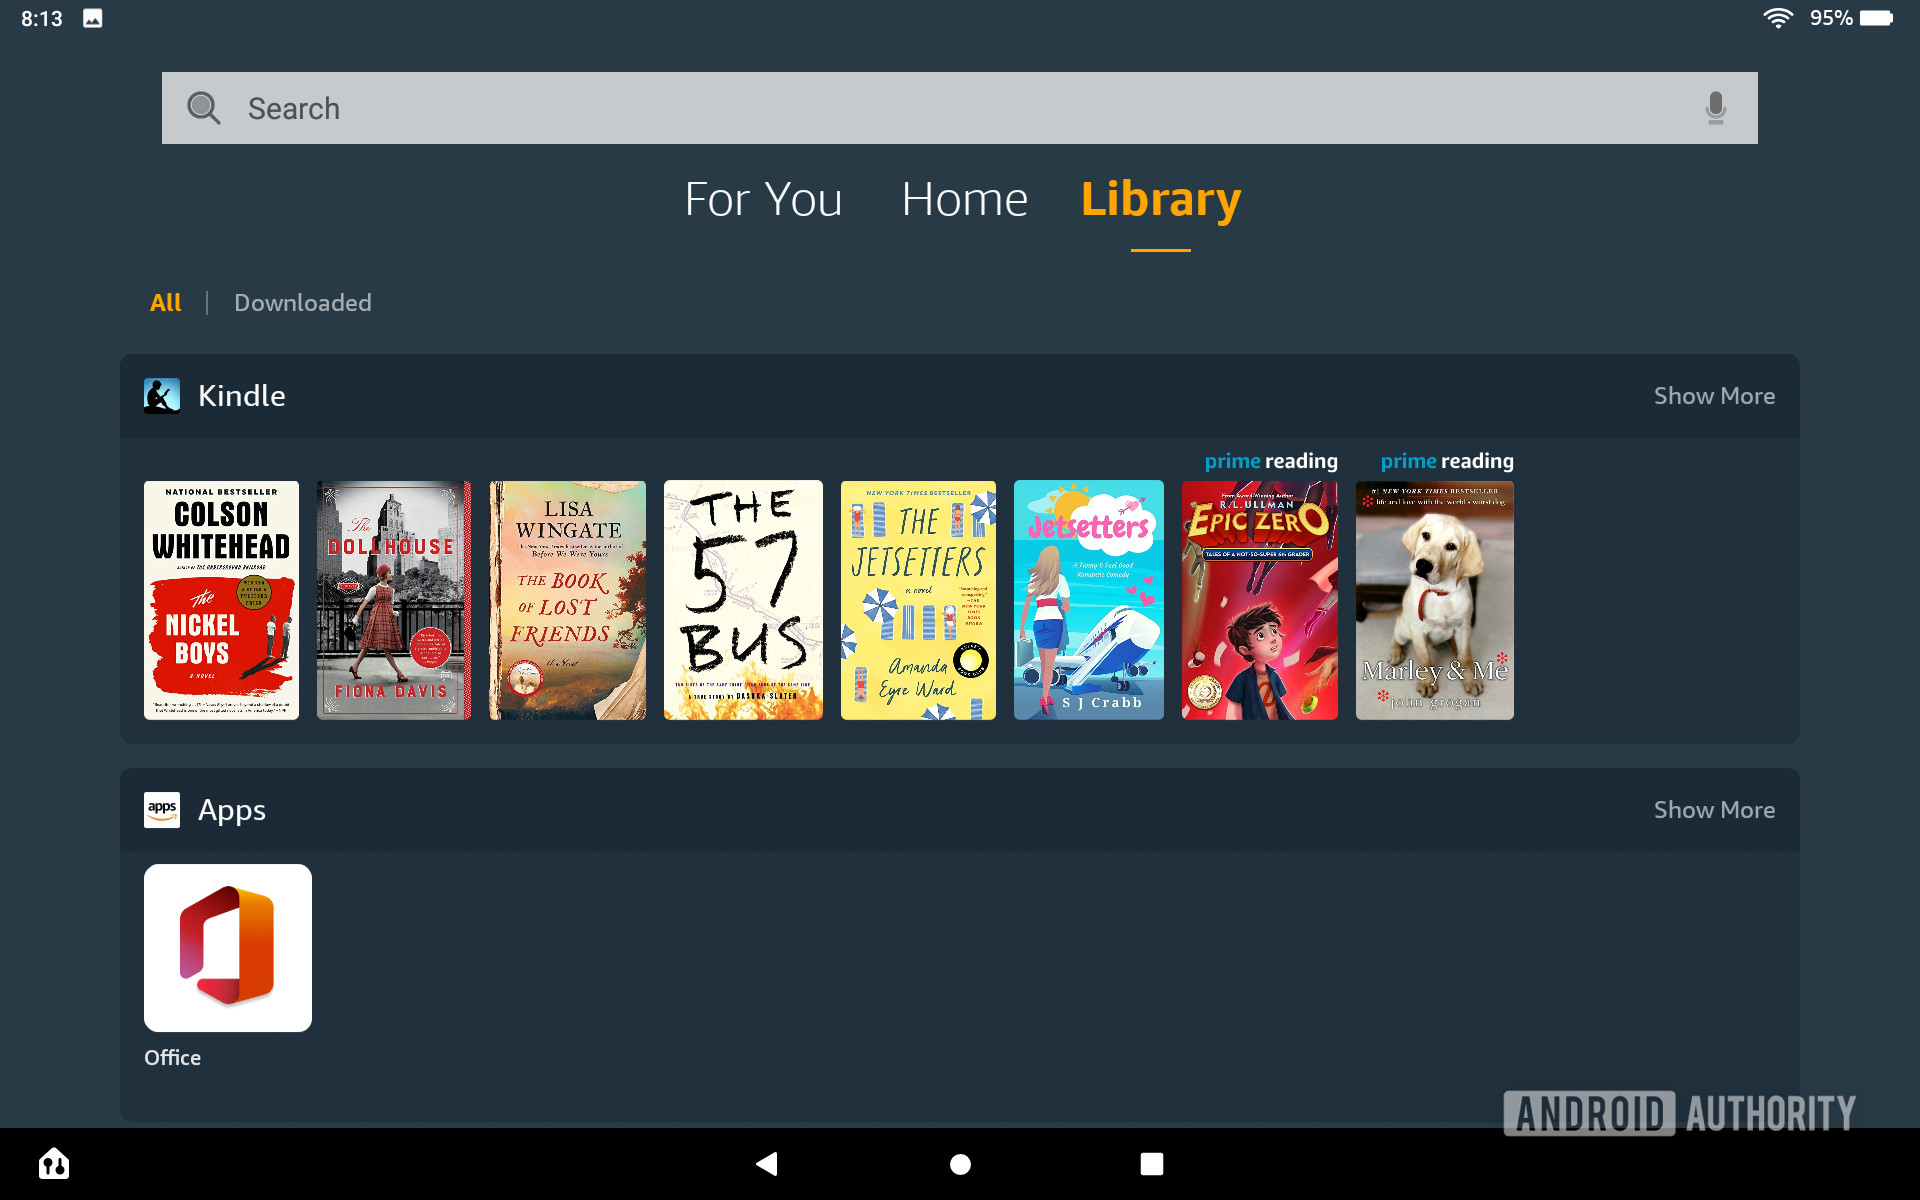 The Amazon Fire HD 10 Plus library.